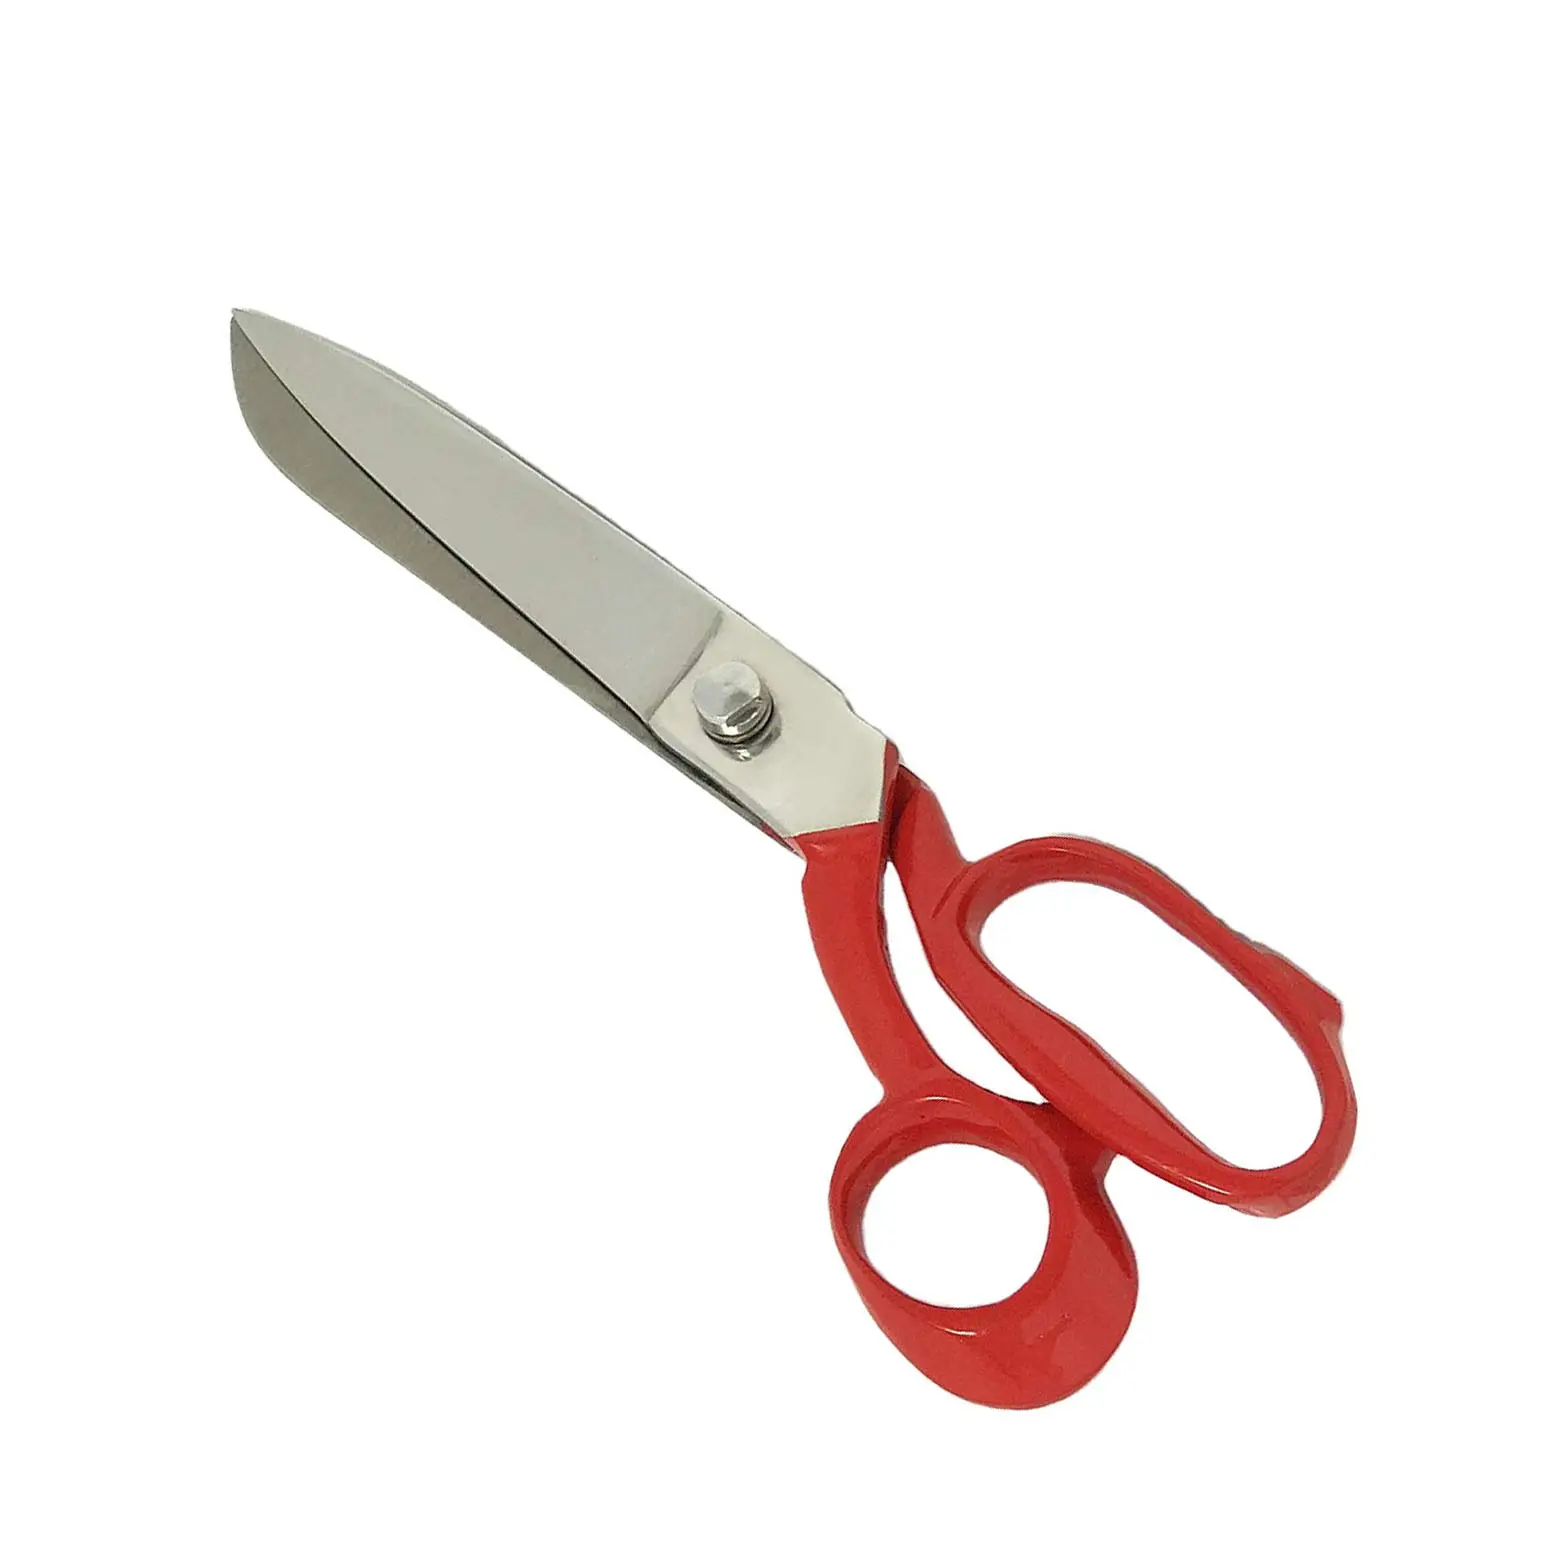 Red Color Handle Tailor Scissors 8'' Left Handed Red Grip Stainless Steel Dressmaking Industrial Garments Making Shears